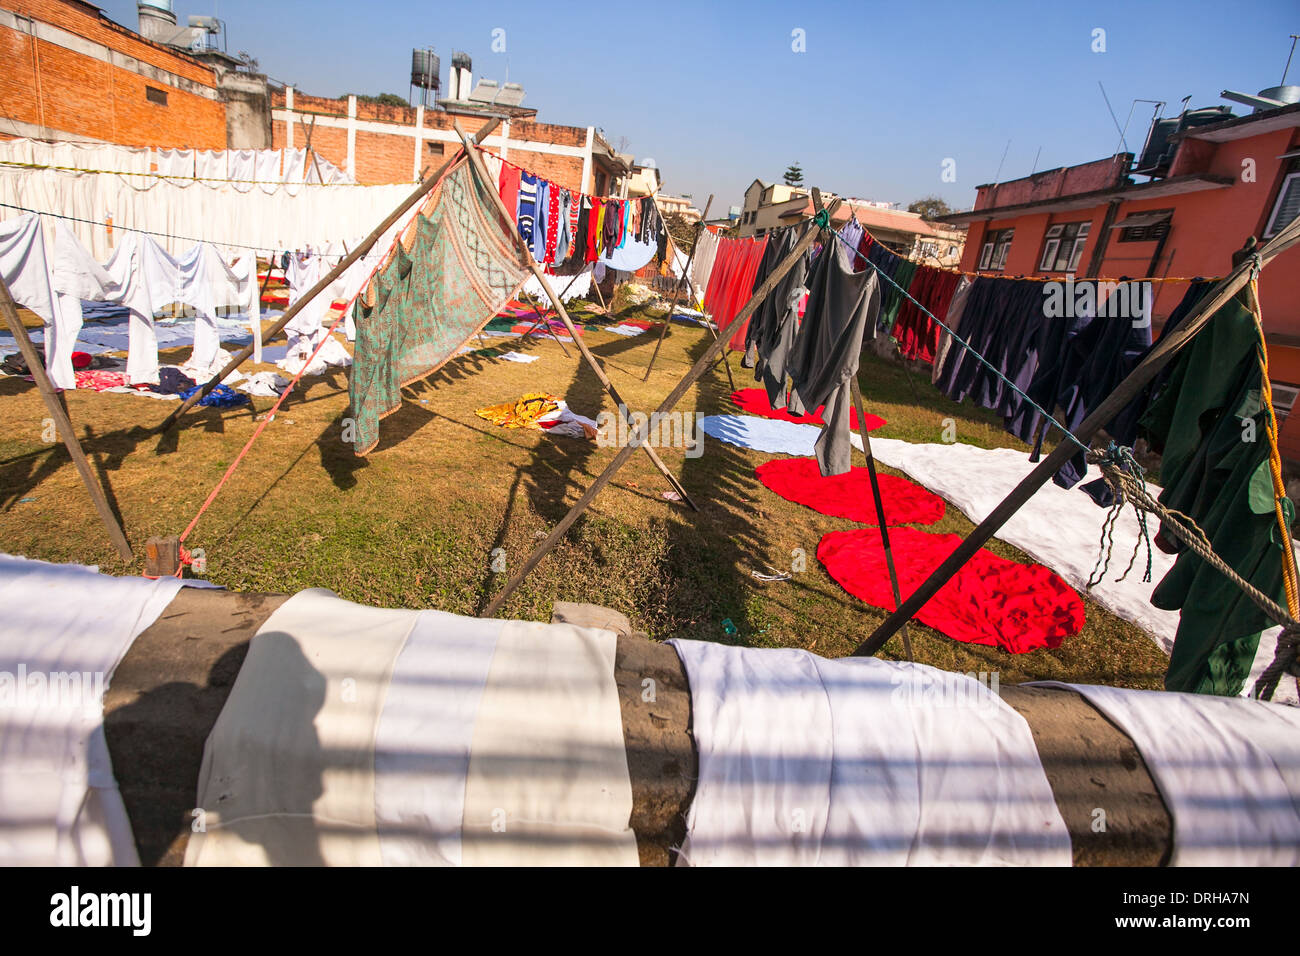 Colorful wet clothes washed. Laundry hanging in the open to dry in Kathmandu. Stock Photo